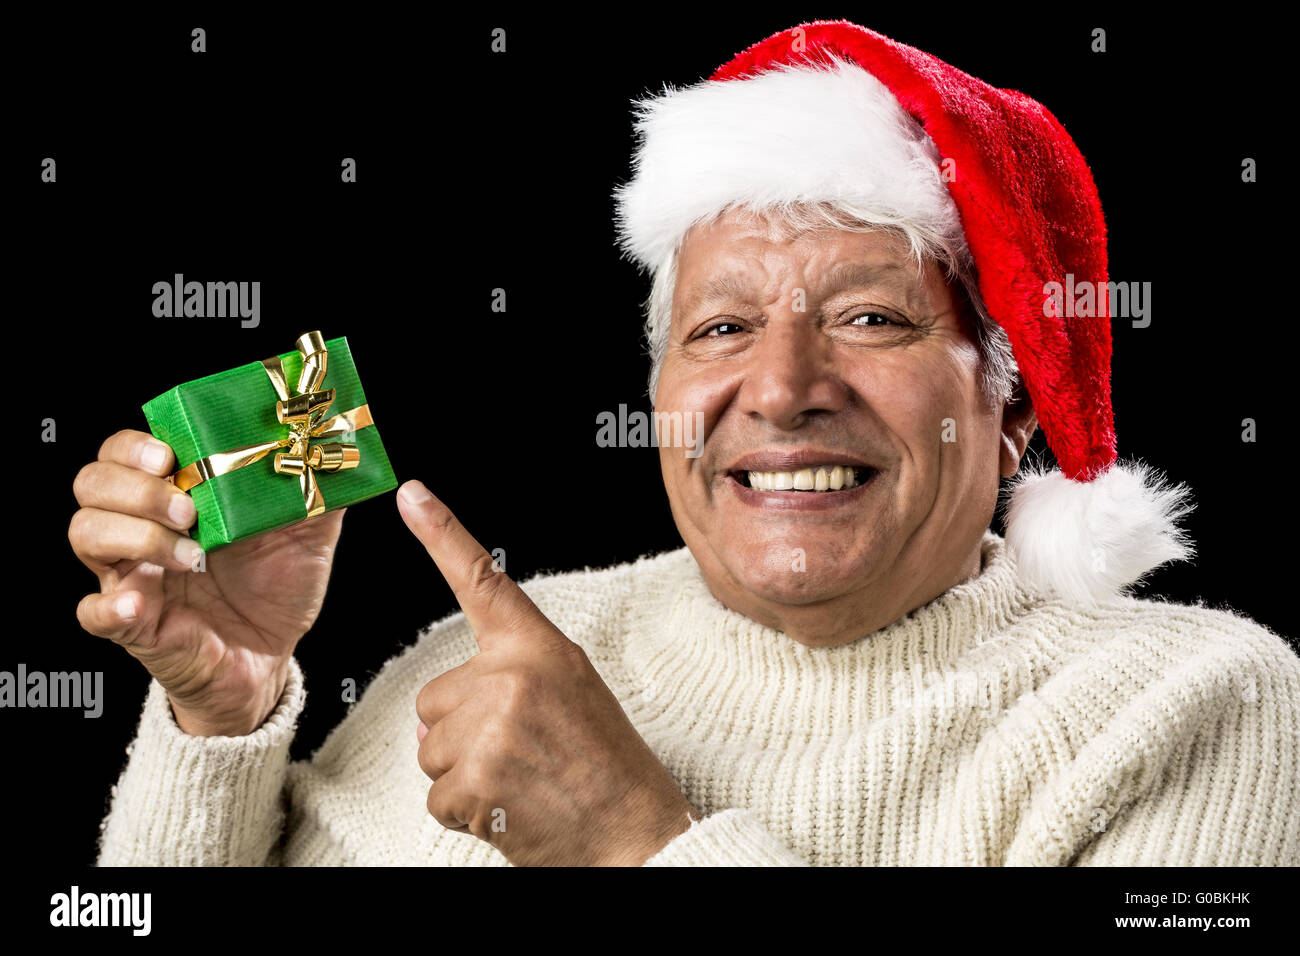 Cheerful Old Man Pointing At Green Wrapped Gift Stock Photo